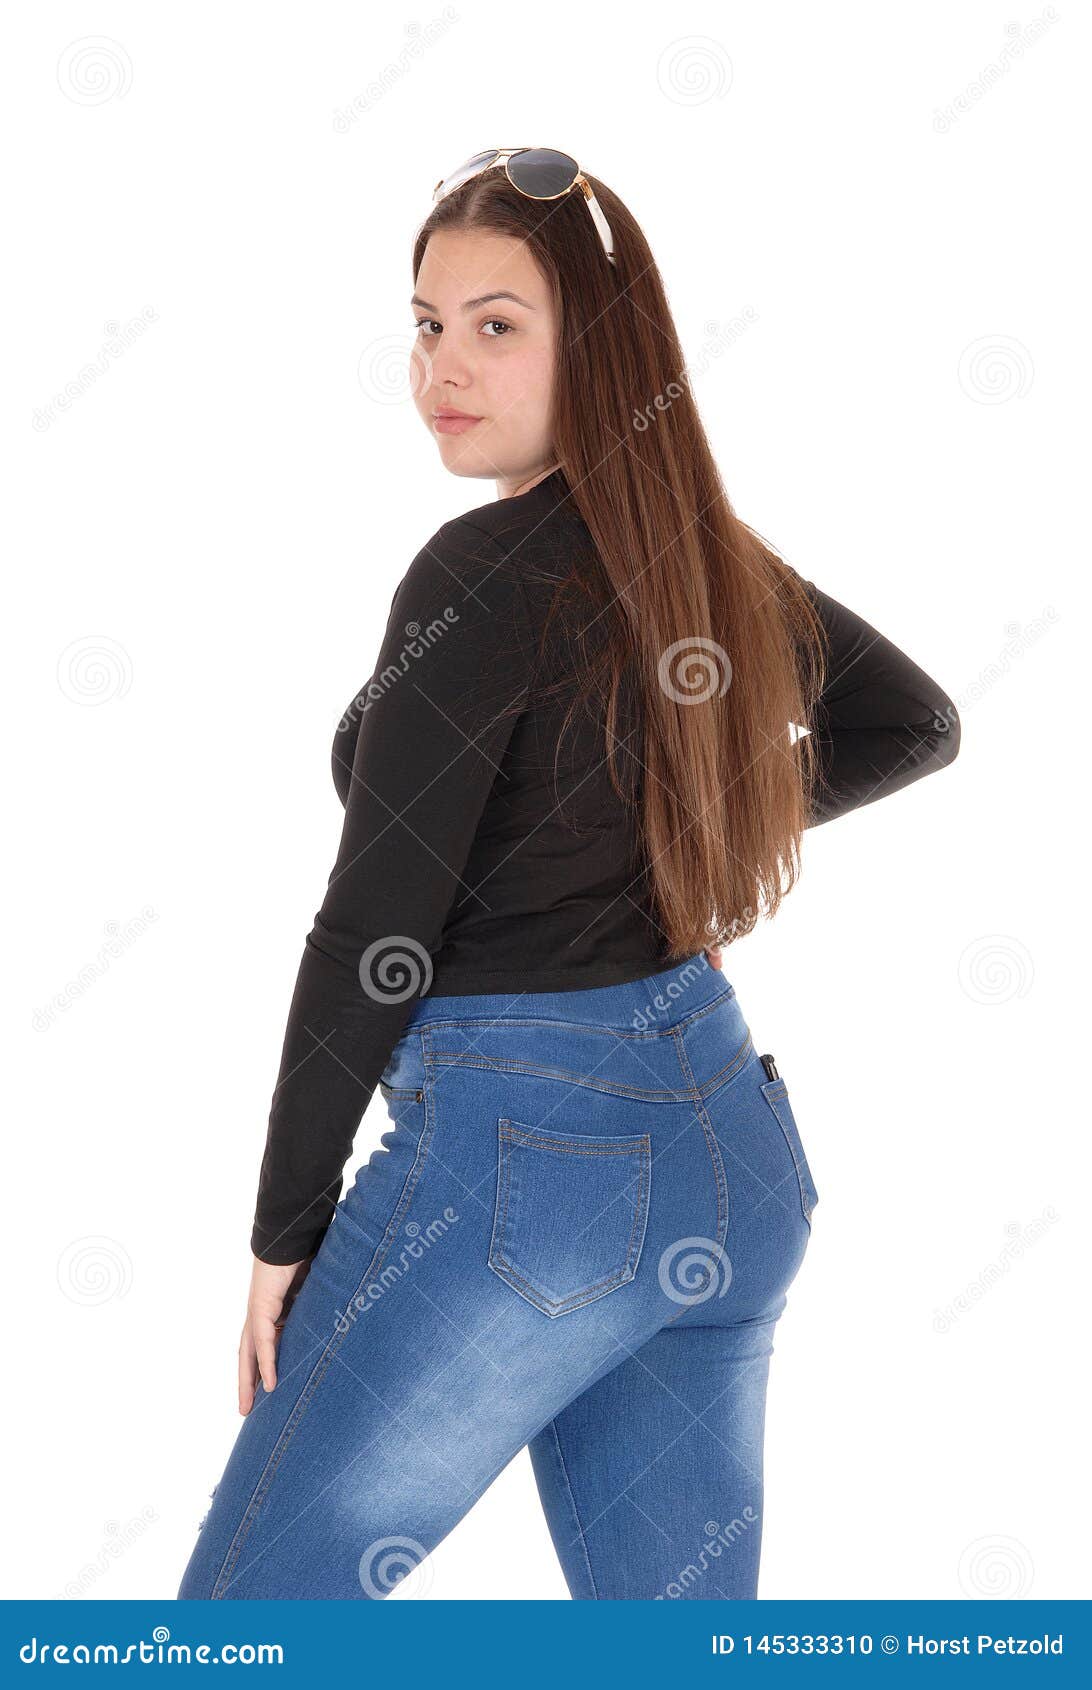 Teens In Jeans Pics